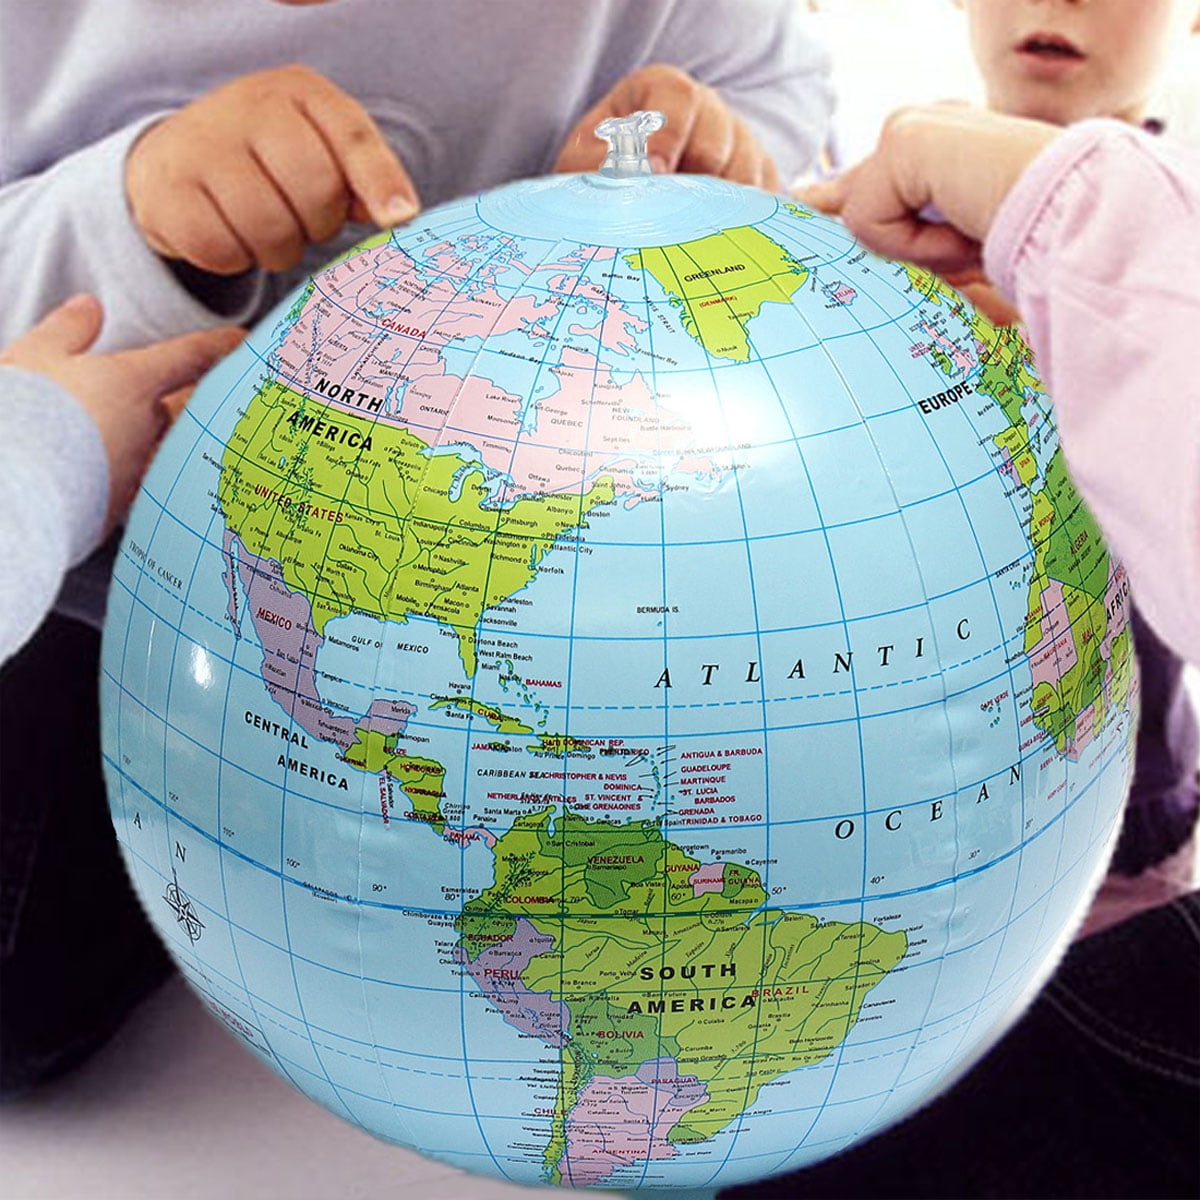 Inflatable Globe Transparent Colorful World Map Earth Educational Geography Toy 